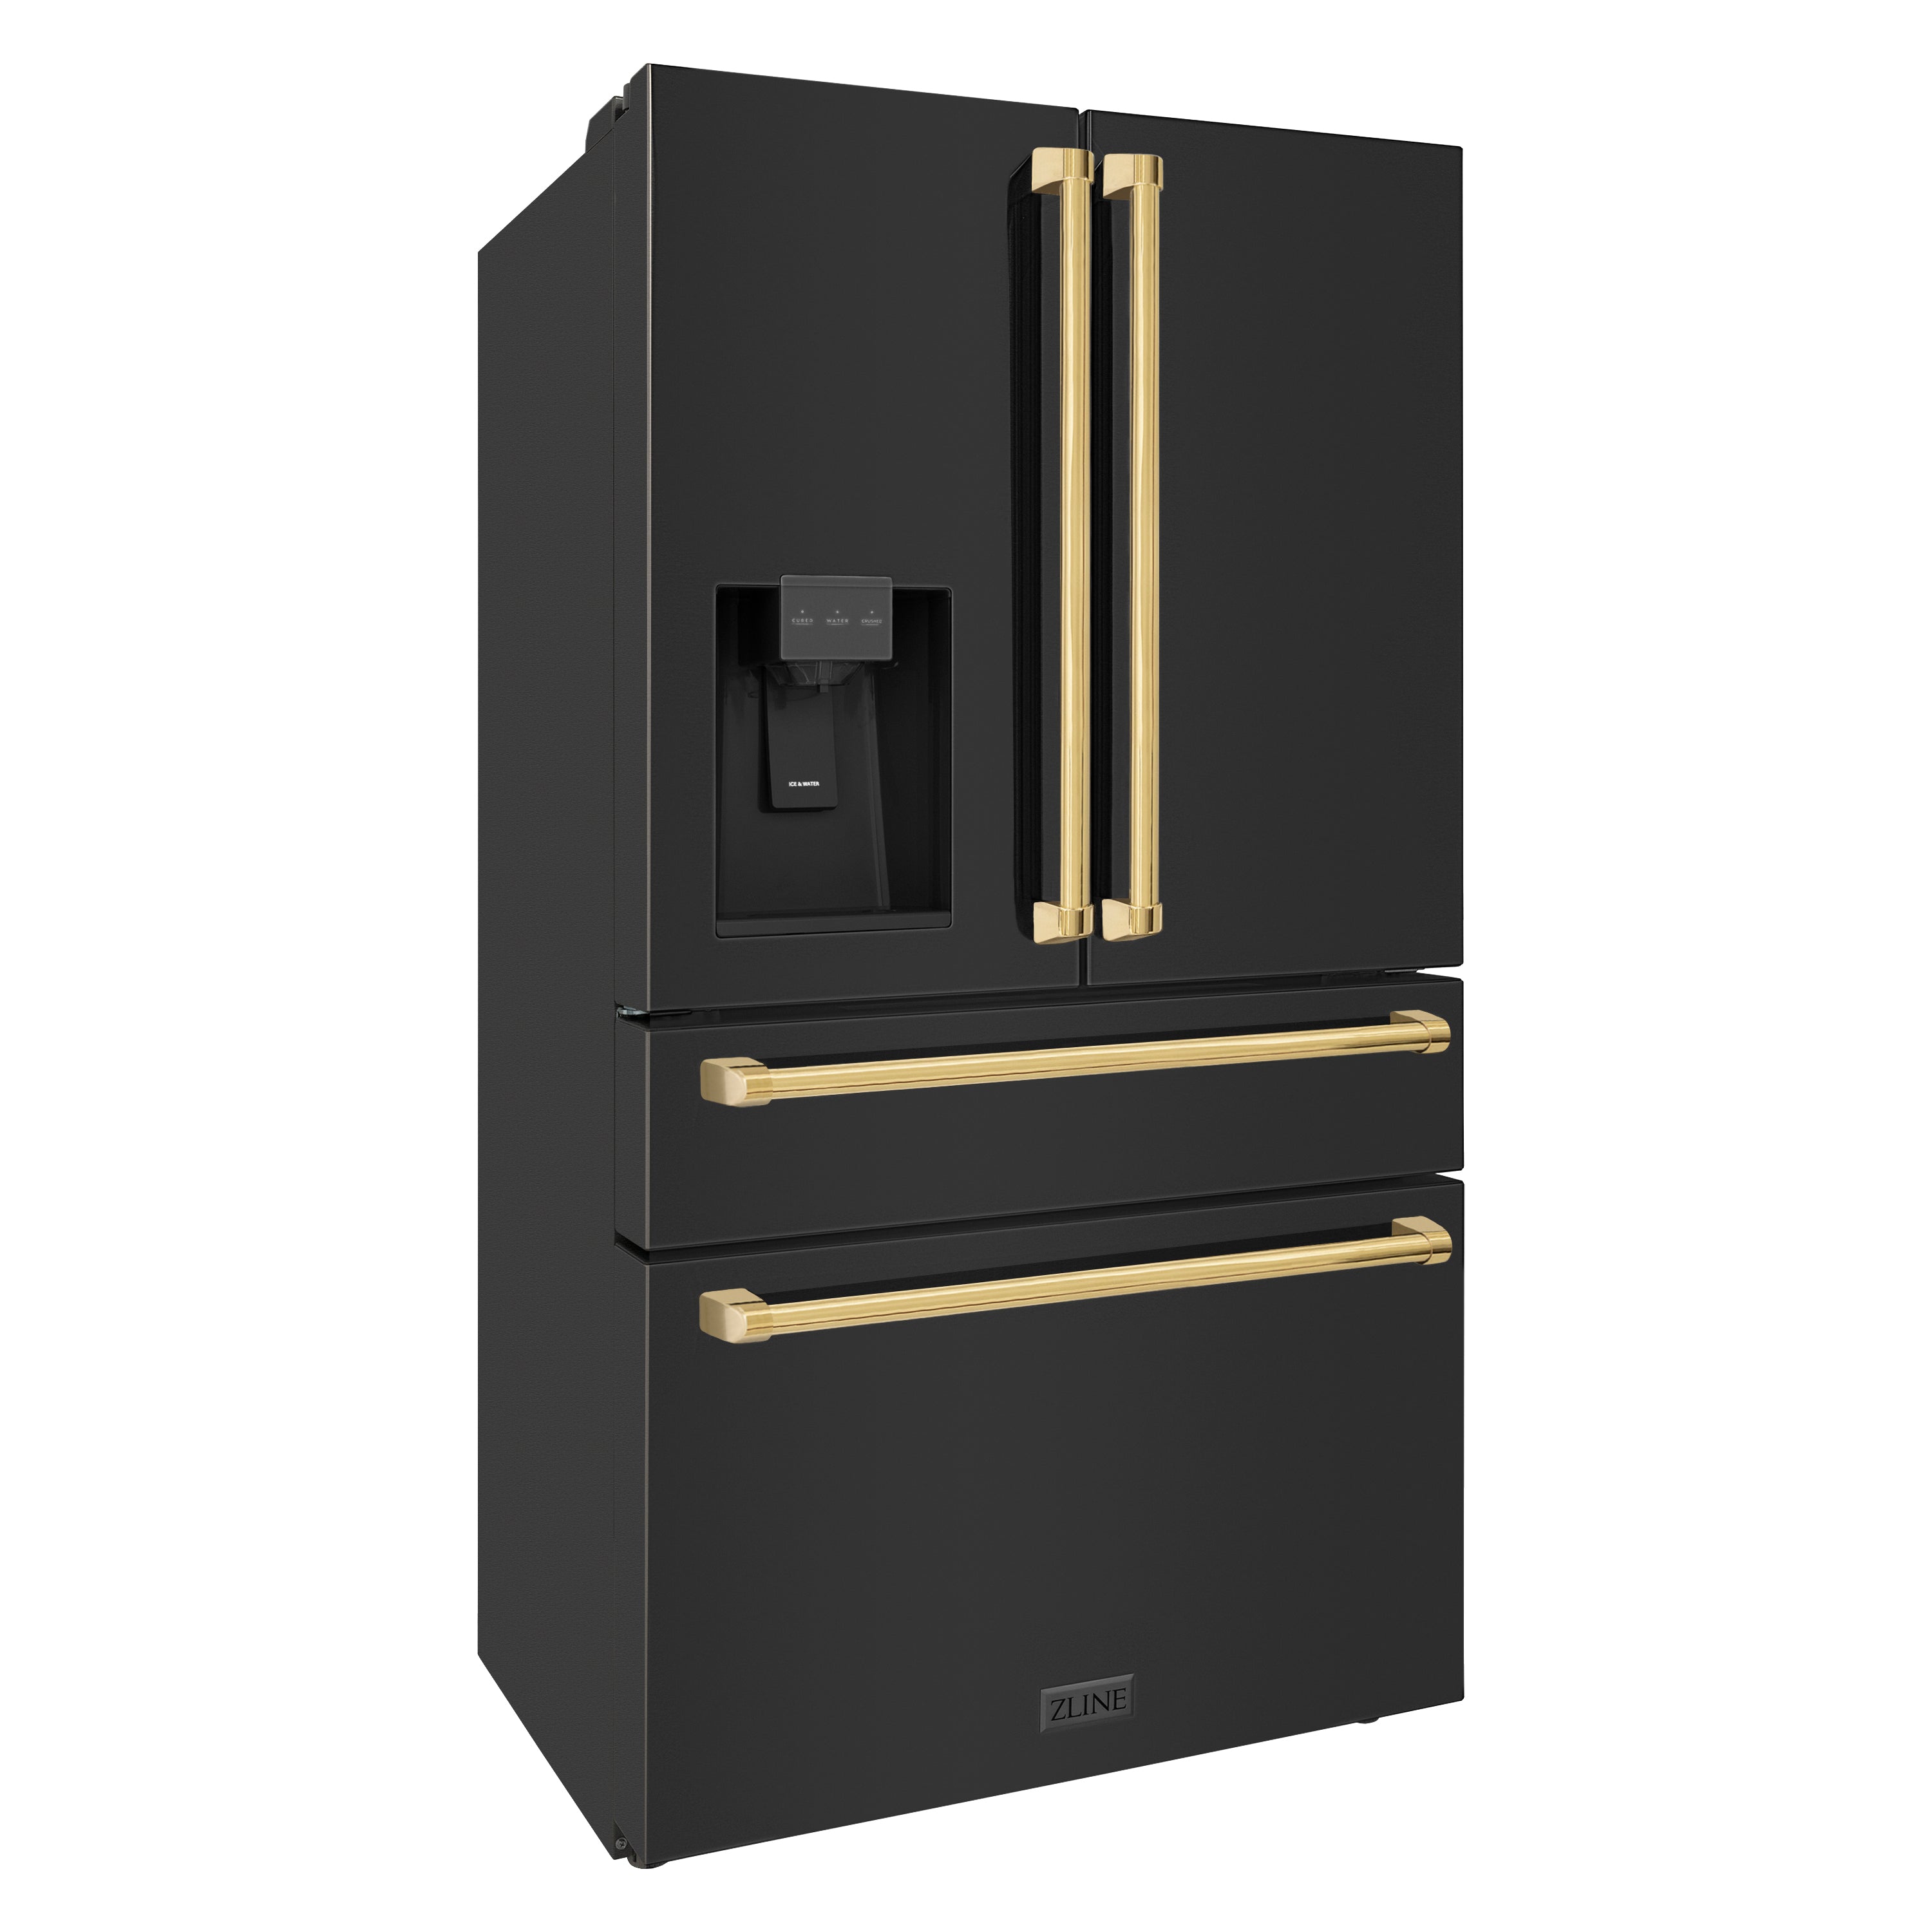 ZLINE 36" Autograph Edition 21.6 cu. ft 4-Door French Door Refrigerator with Water and Ice Dispenser in Fingerprint Resistant Black Stainless Steel with Polished Gold Handles (RFMZ-W-36-BS-G)